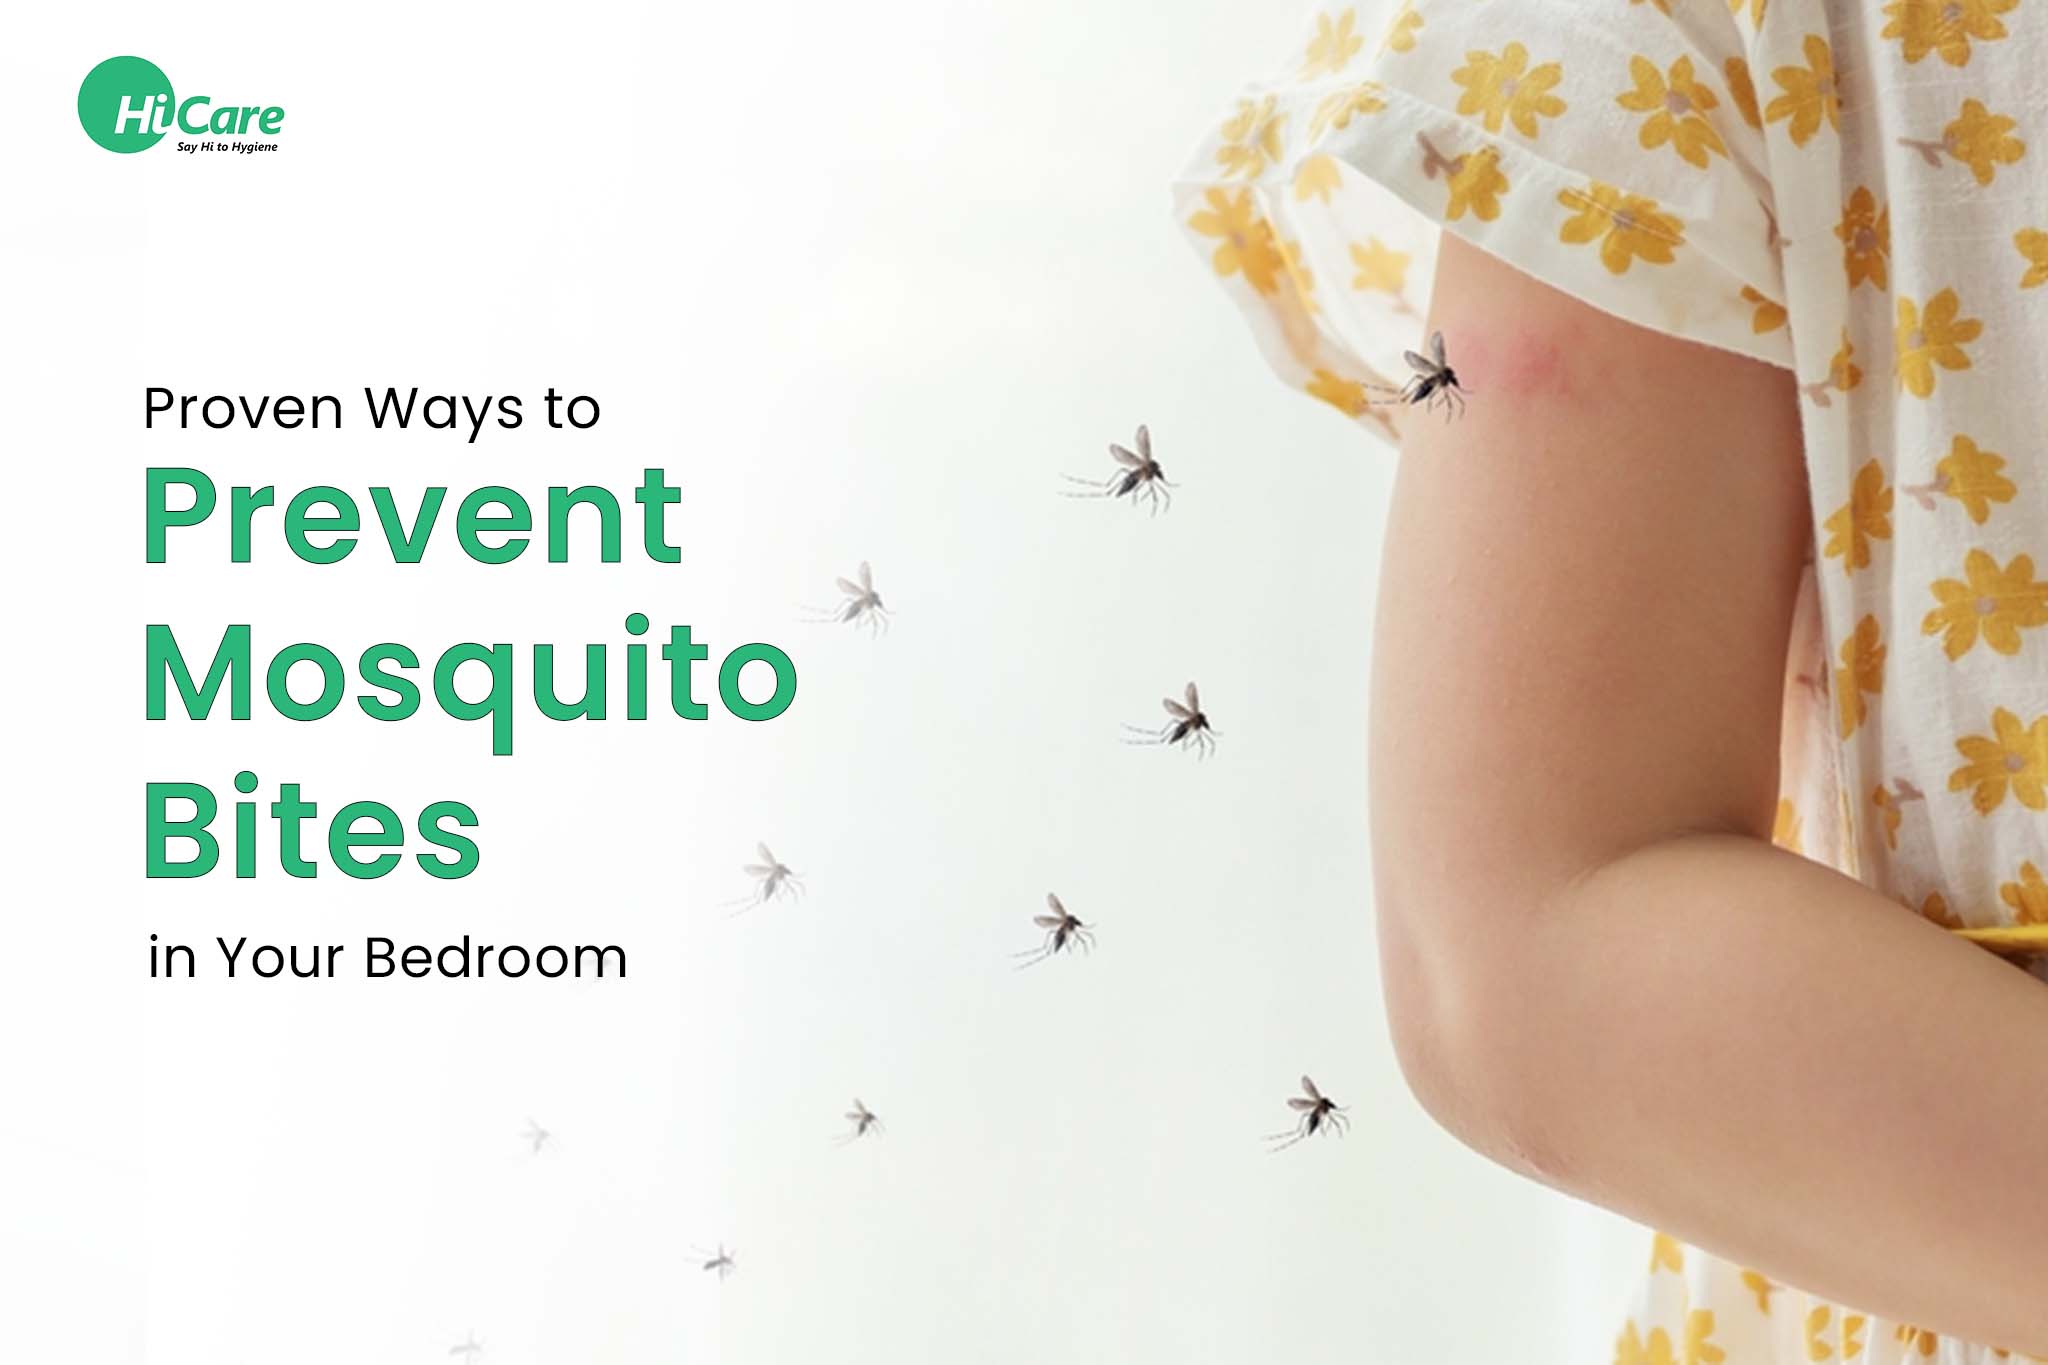 10 Proven Ways to Prevent Mosquito Bites in Your Bedroom